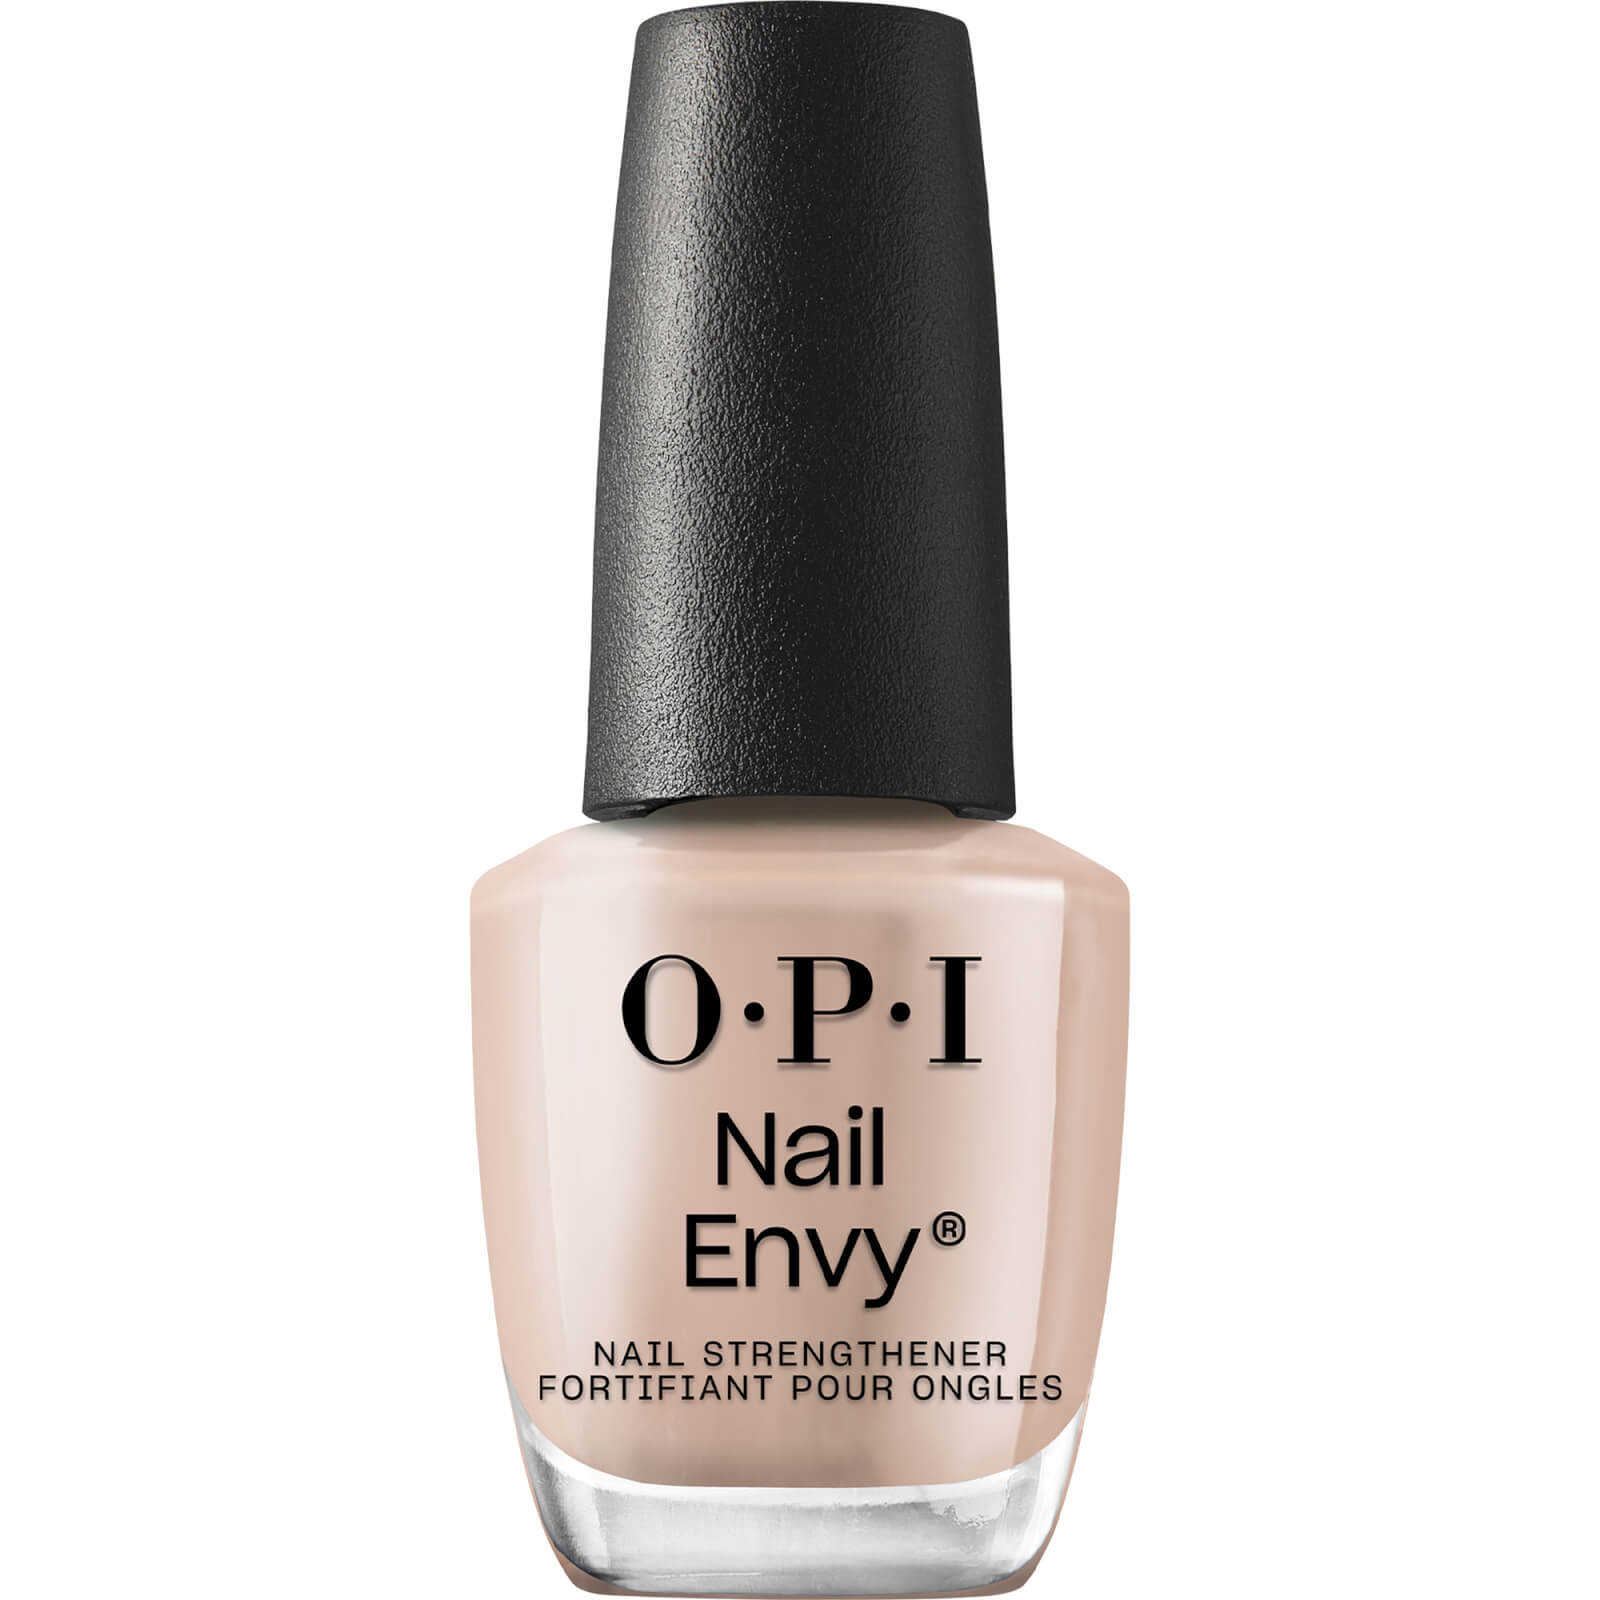 Opi Nail Envy Nail Strengthener 15ml - Double Nude-y